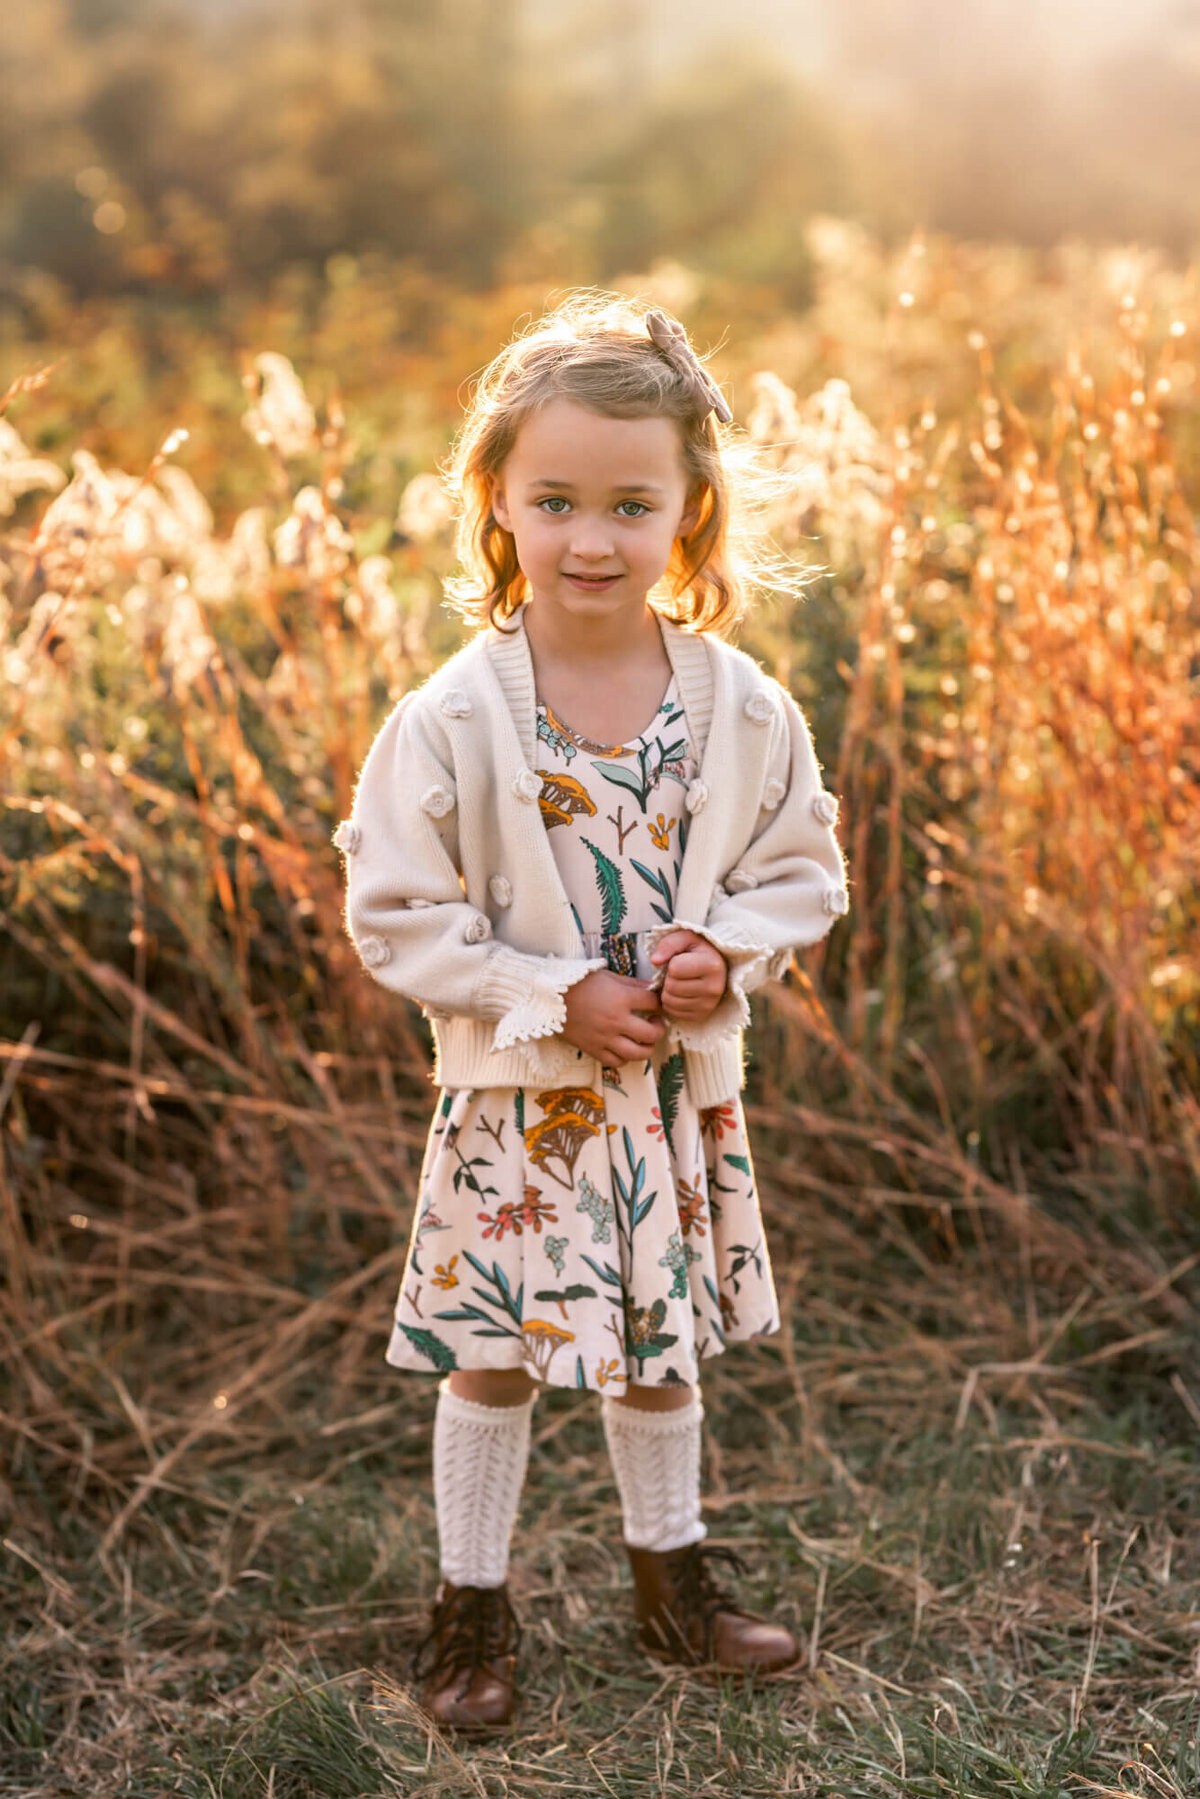 An adorable girl in a fall dress with knee socks and brown boots